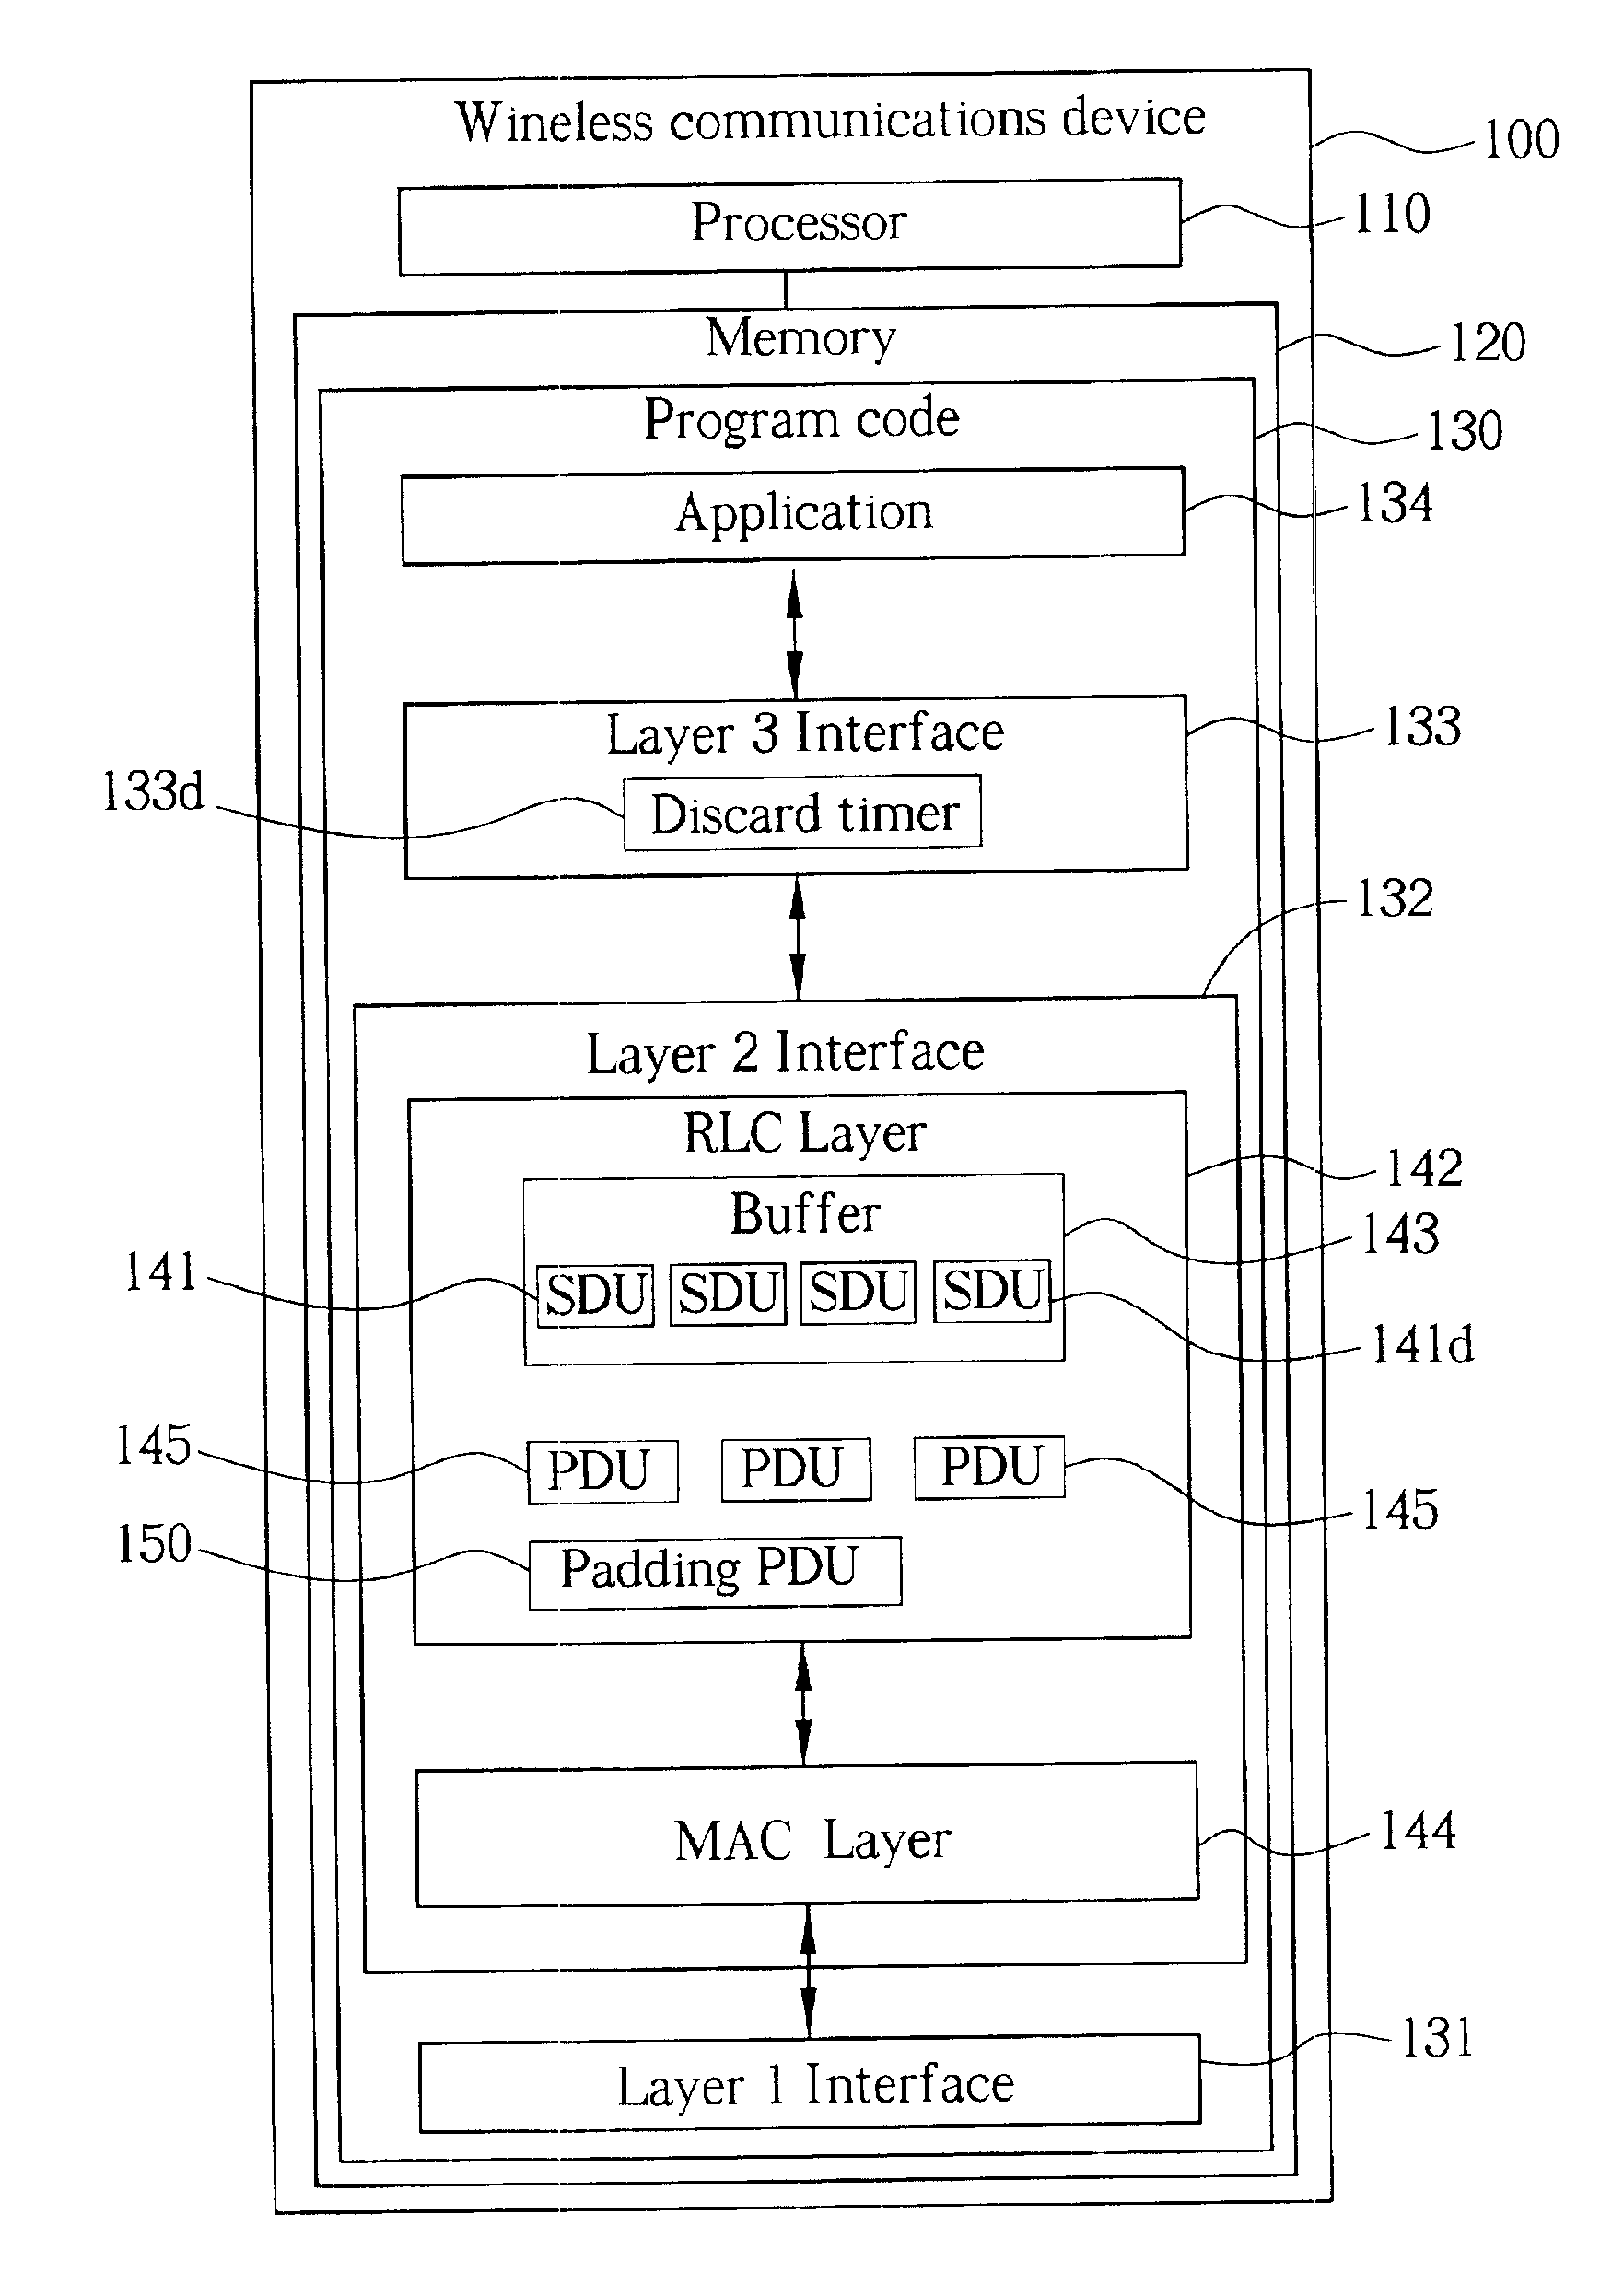 Processing unexpected transmission interruptions in a wireless communications system